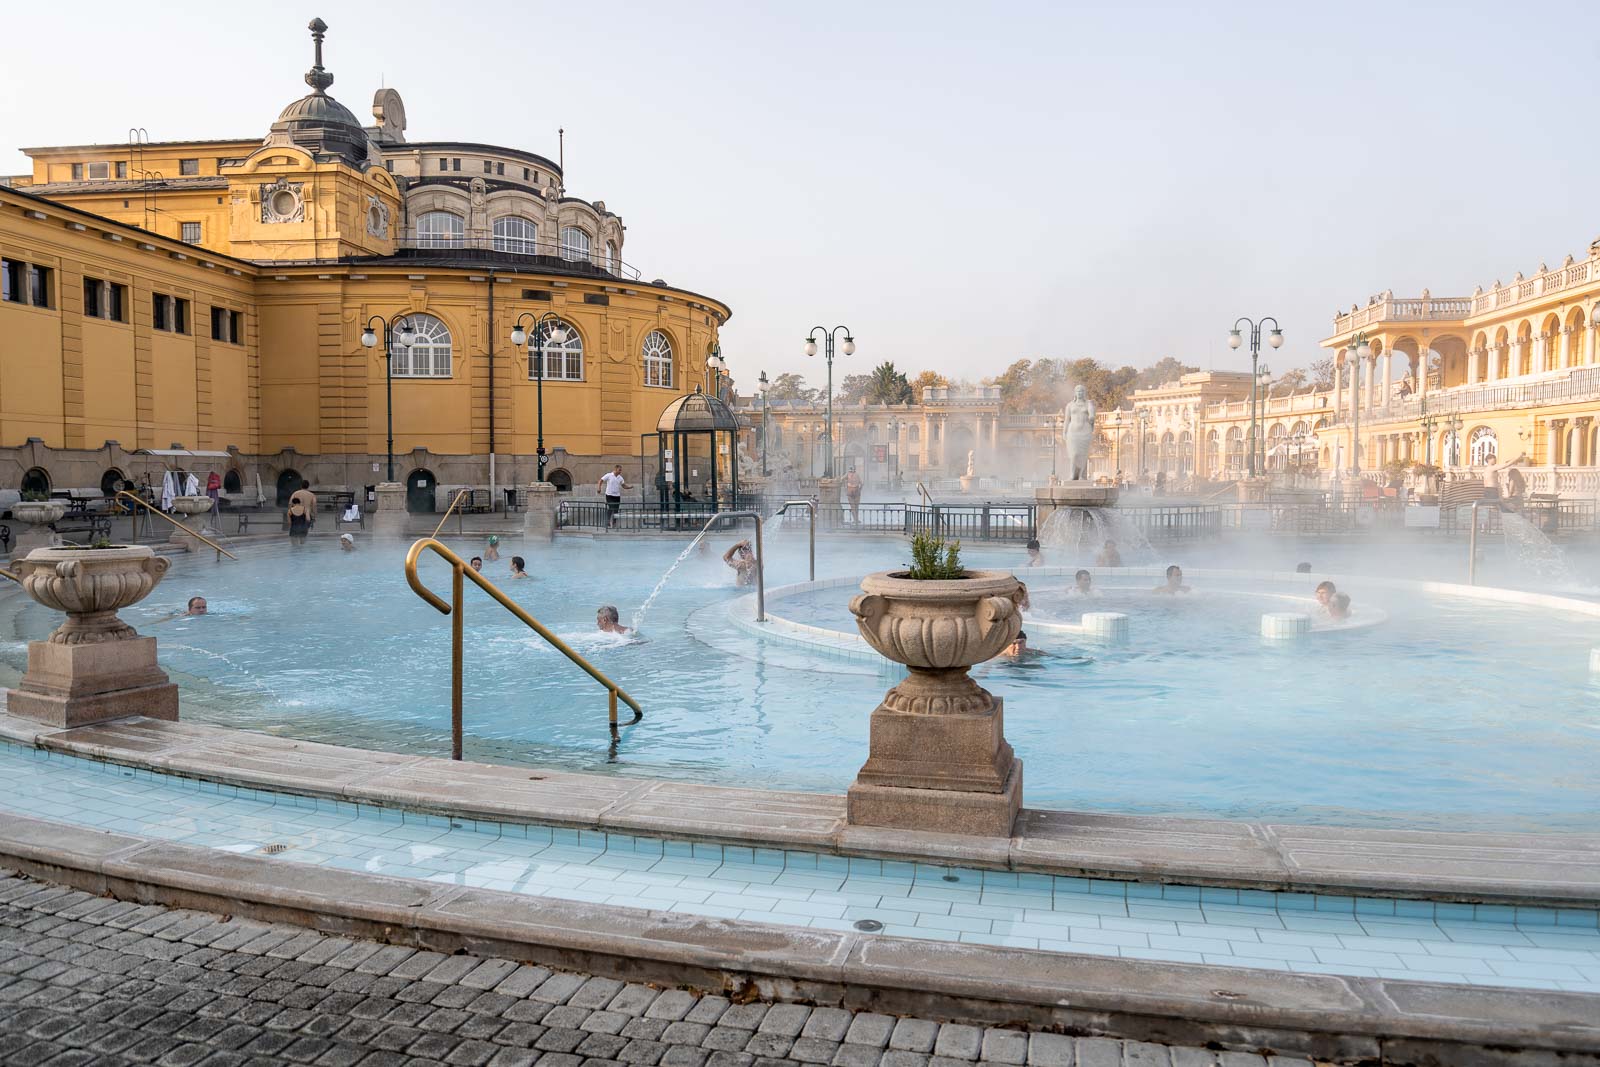 The Széchenyi Thermal Baths in Budapest